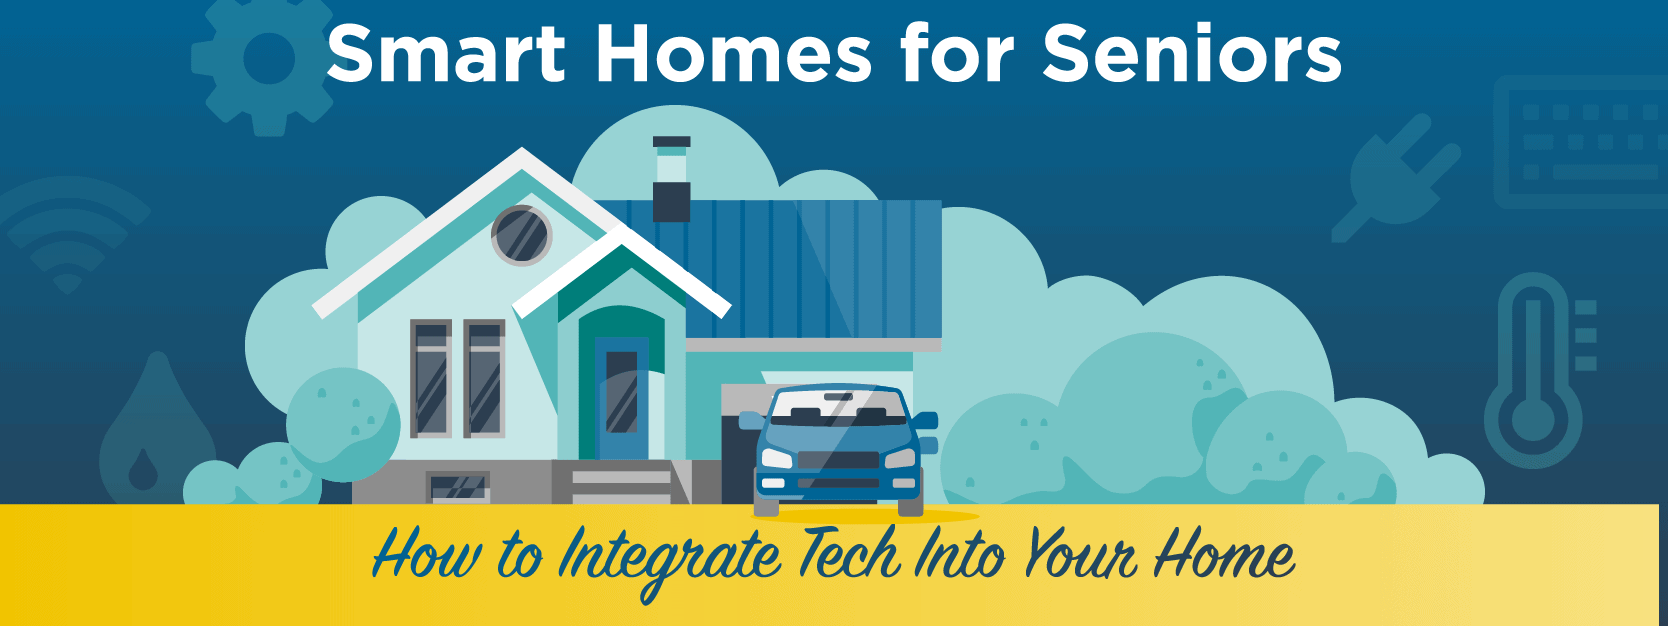 How to integrate tech into your home